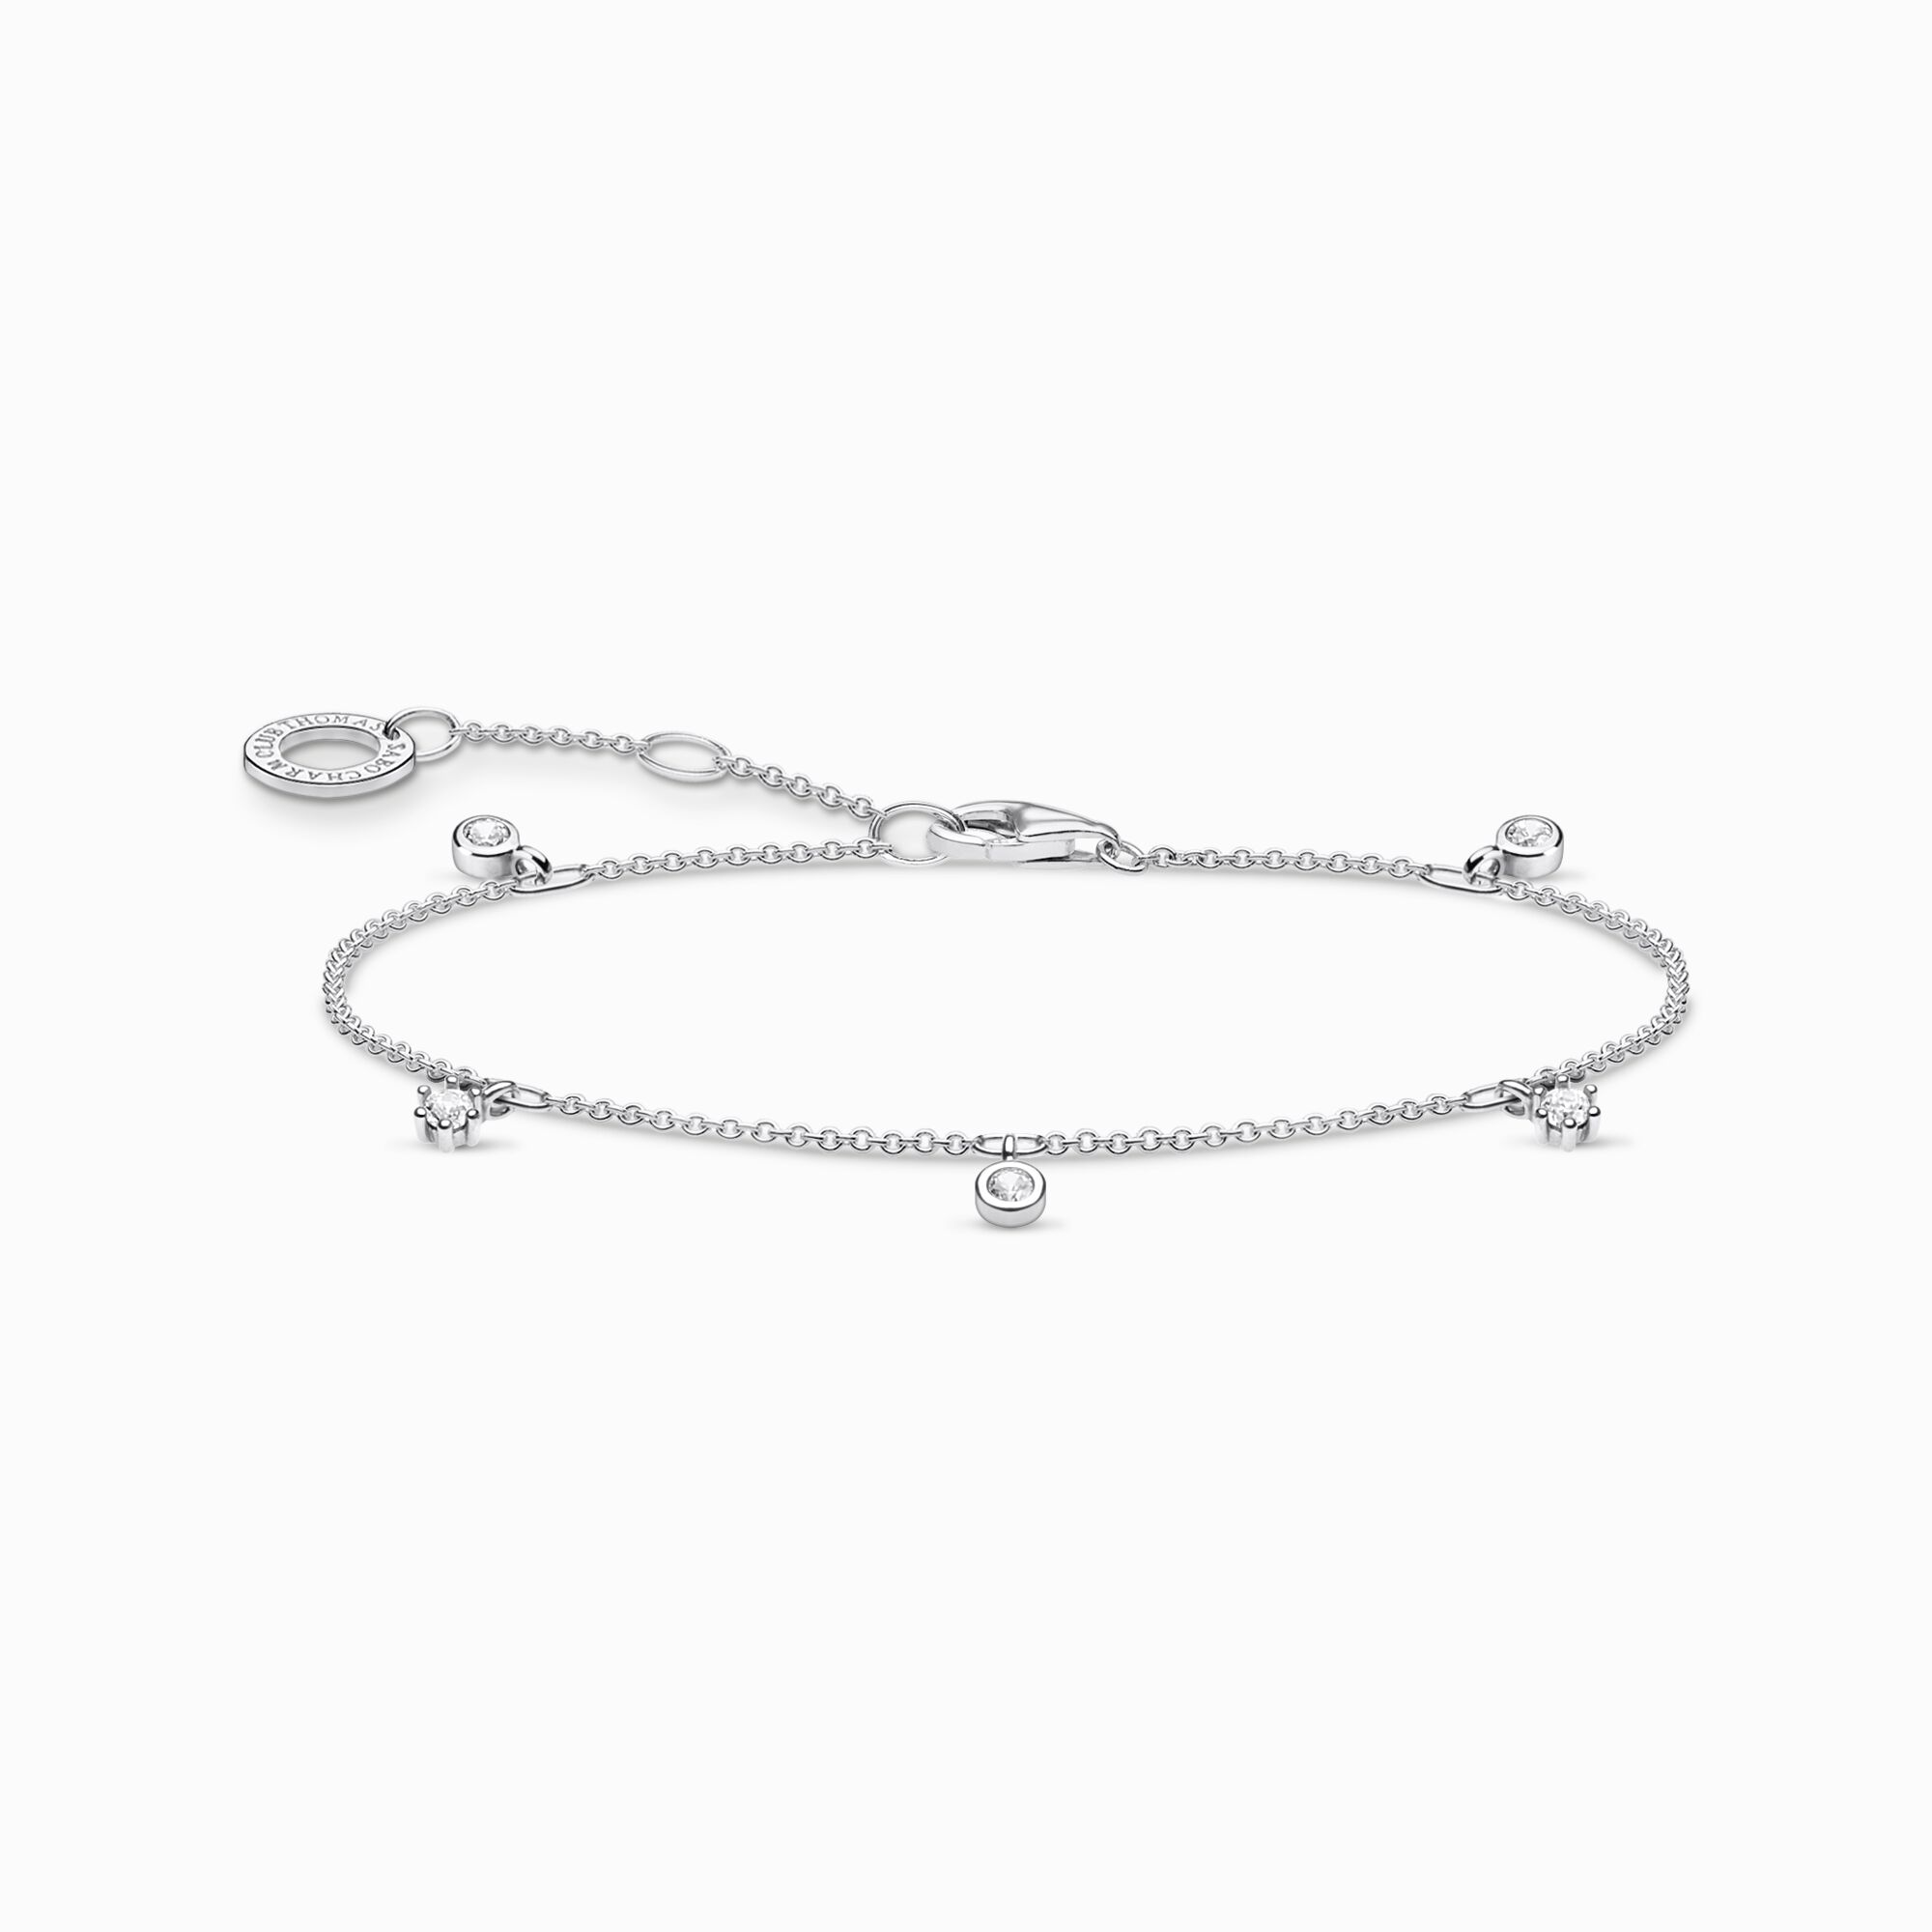 Bracelet white stones, silver from the Charming Collection collection in the THOMAS SABO online store